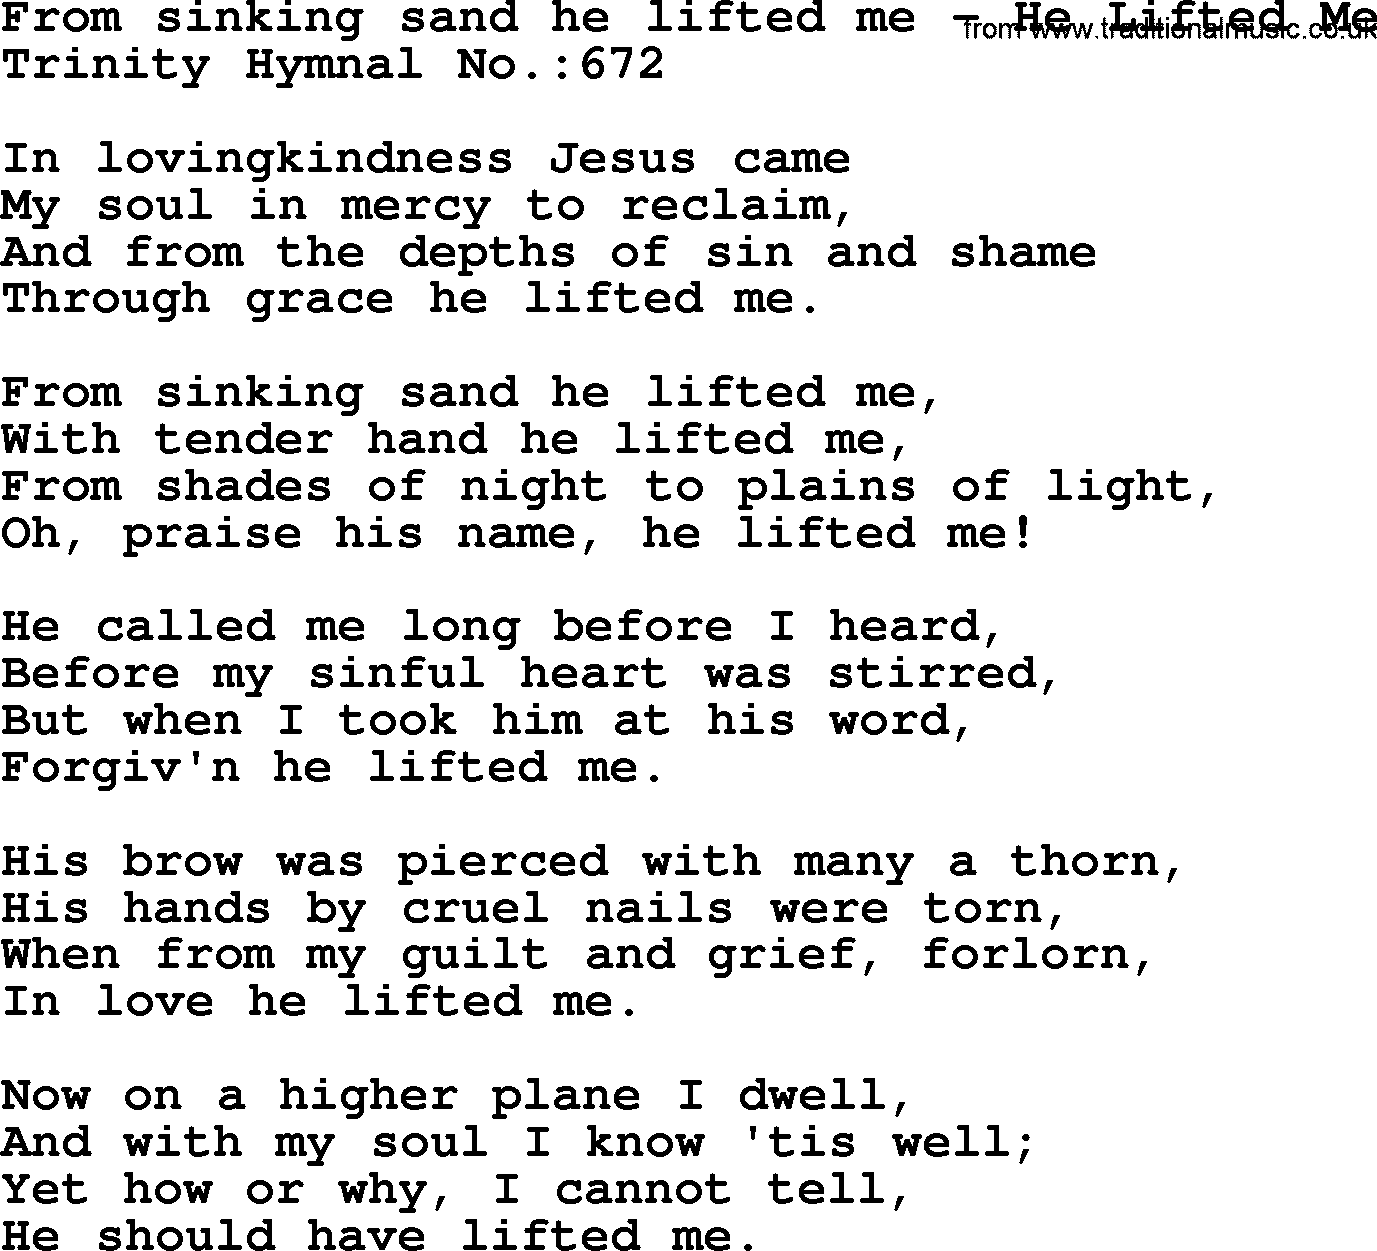 Trinity Hymnal Hymn: From Sinking Sand He Lifted Me--He Lifted Me, lyrics with midi music